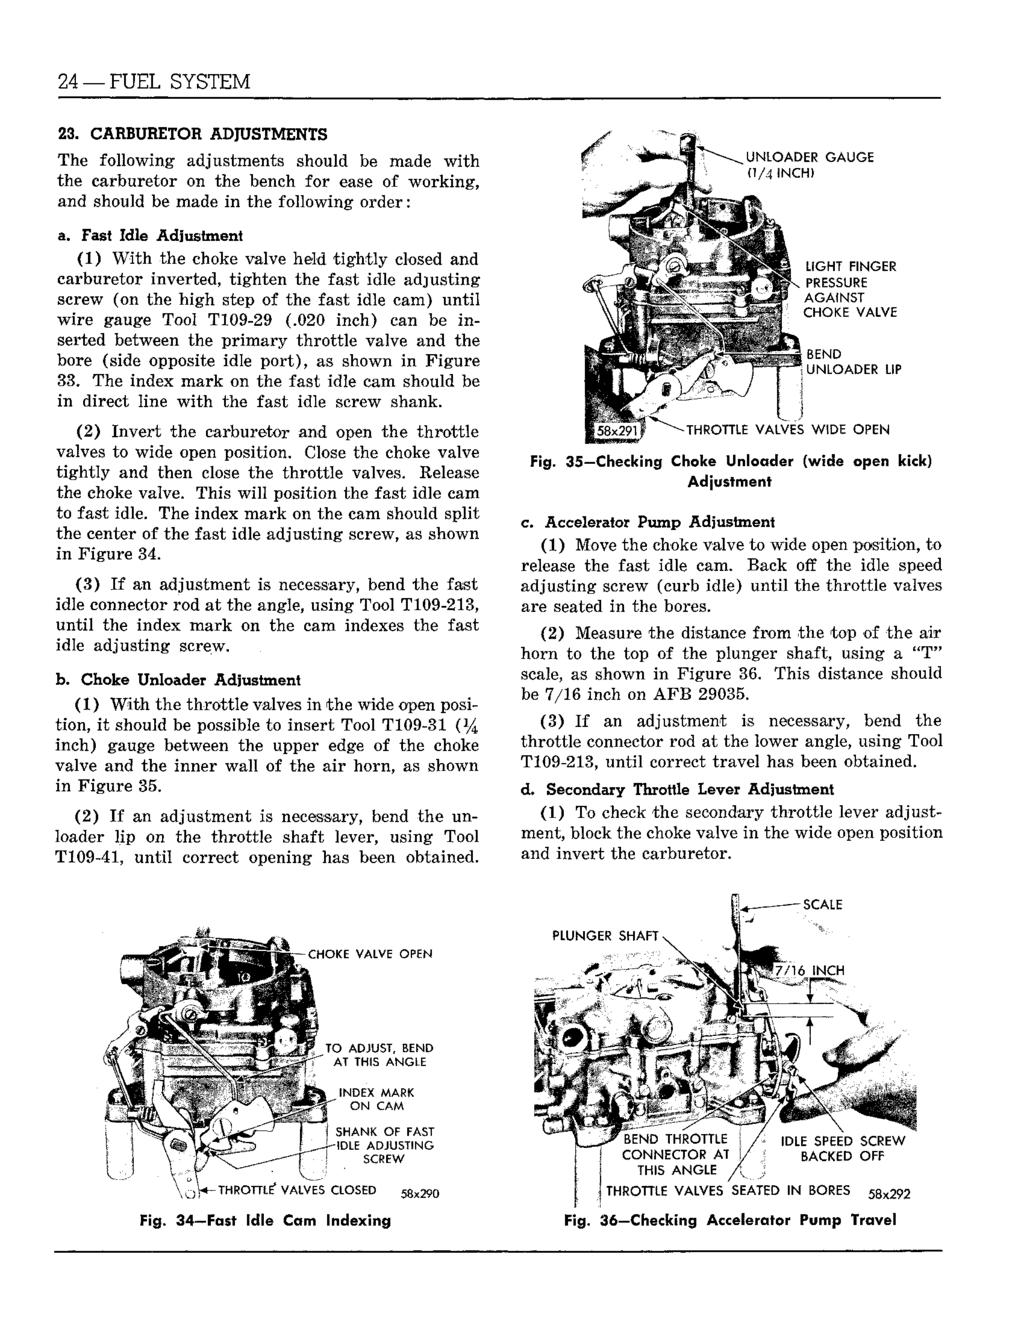 24 FUEL SYSTEM 23. CARBURETOR ADJUSTMENTS The following adjustments should be made with the carburetor on the bench for ease of working, and should be made in the following order: UNLOADER ':.